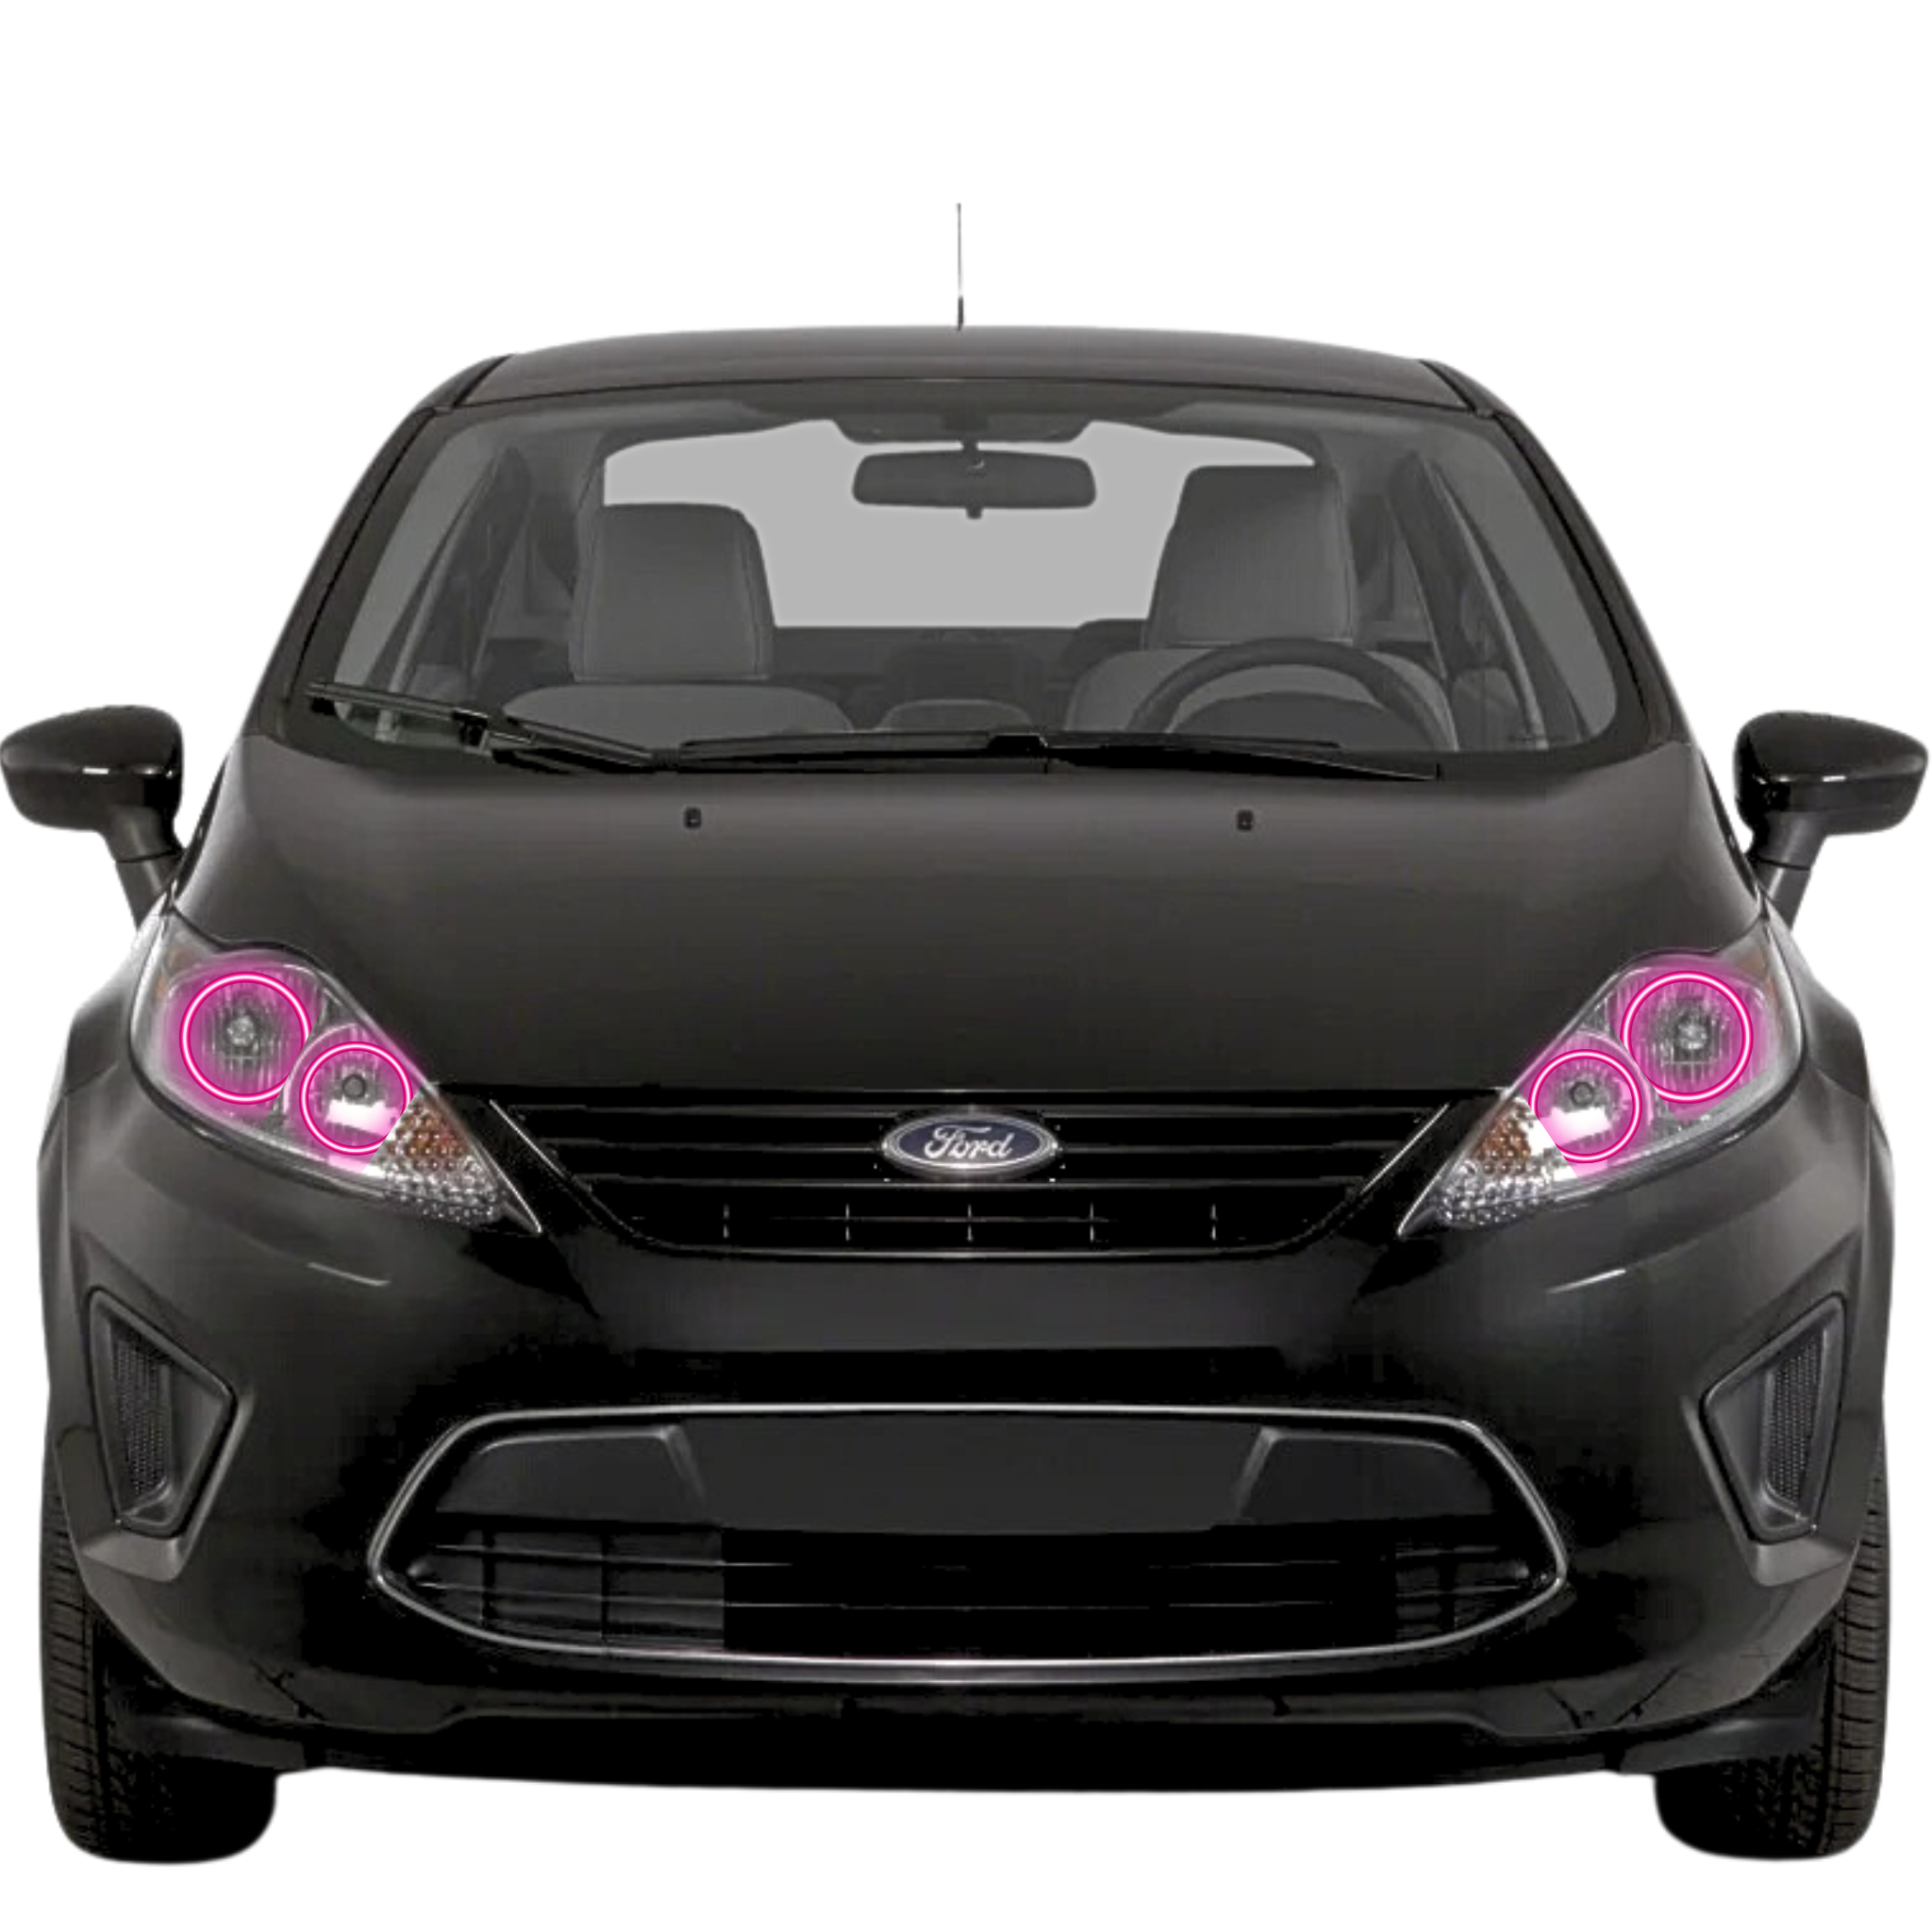 2011-2013 Ford Fiesta Multicolor Halo Kit - RGB Halo Kits Multicolor Flow Series Color Chasing RGBWA LED headlight kit Oracle Lighting Trendz OneUpLighting Morimoto theretrofitsource AutoLEDTech Diode Dynamics